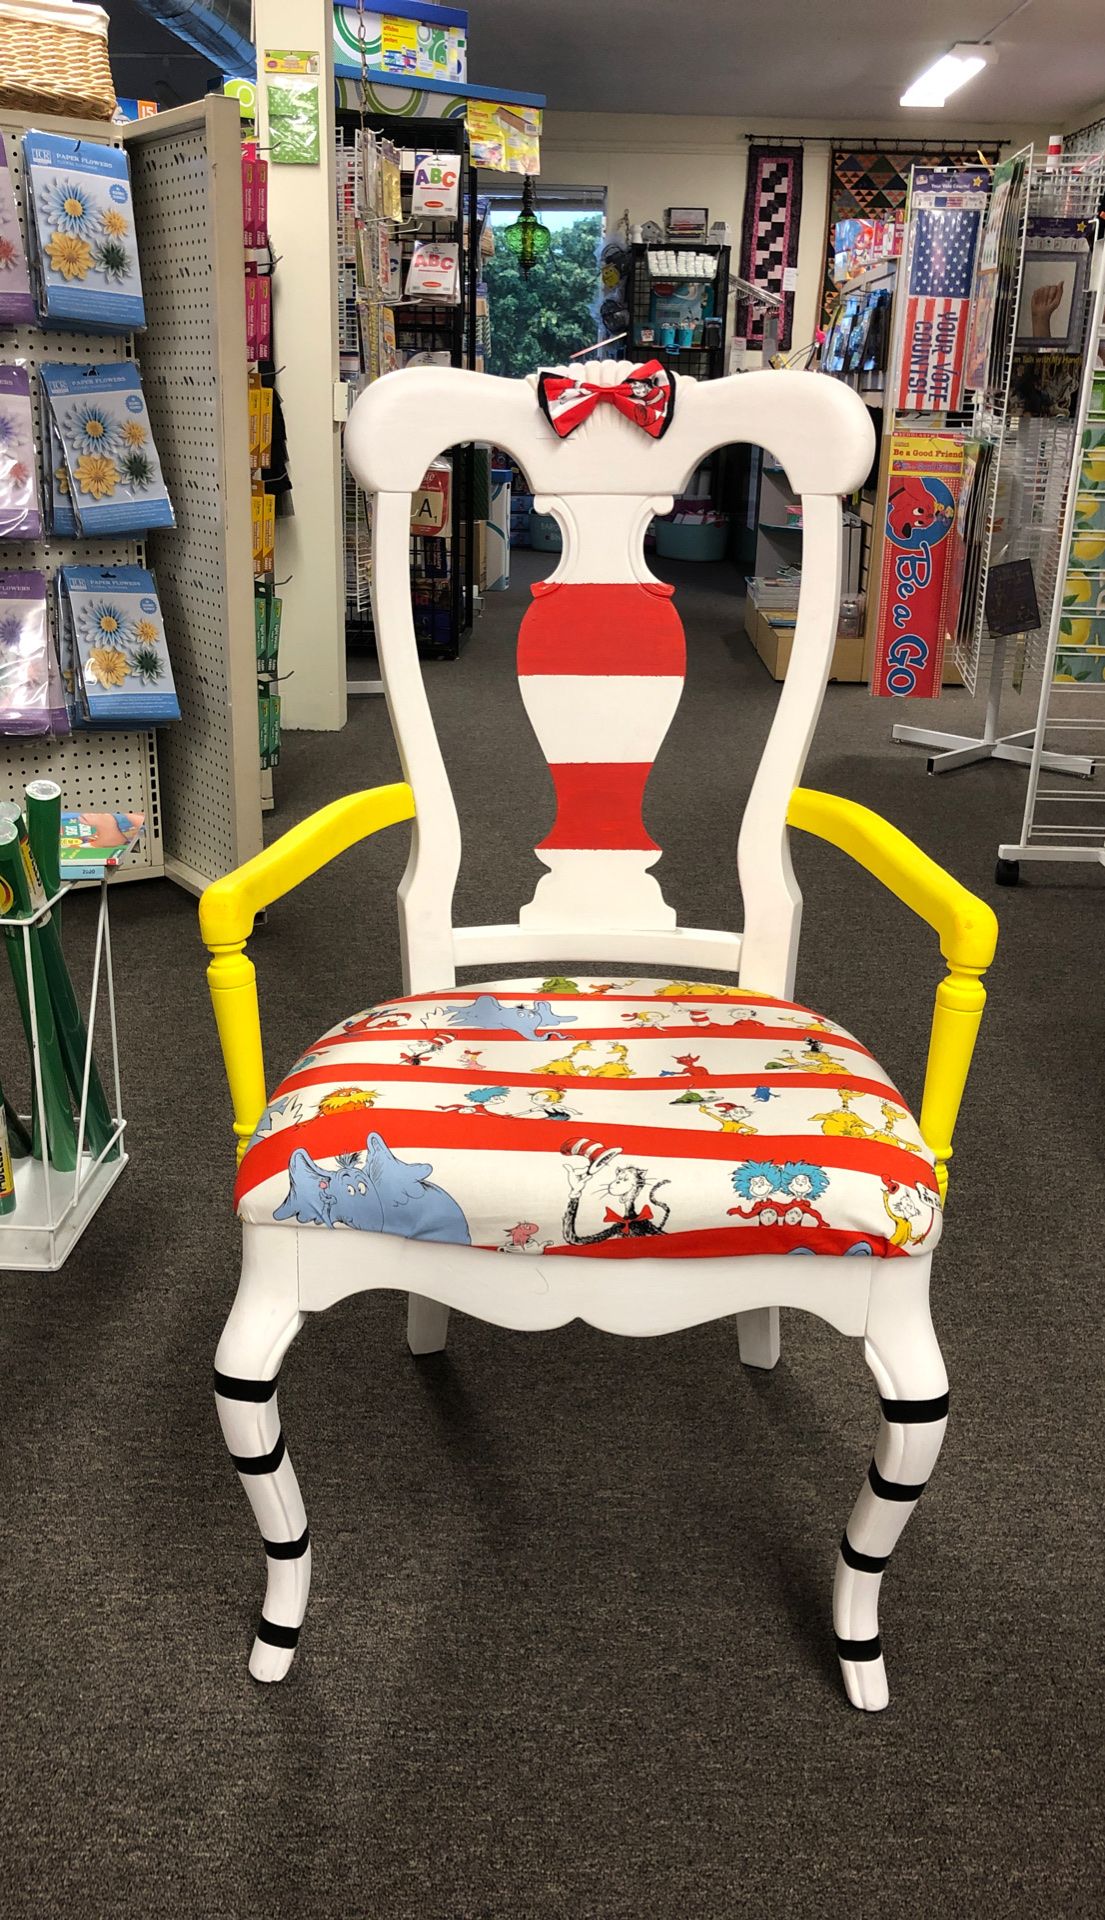 Dr Suess reading chair